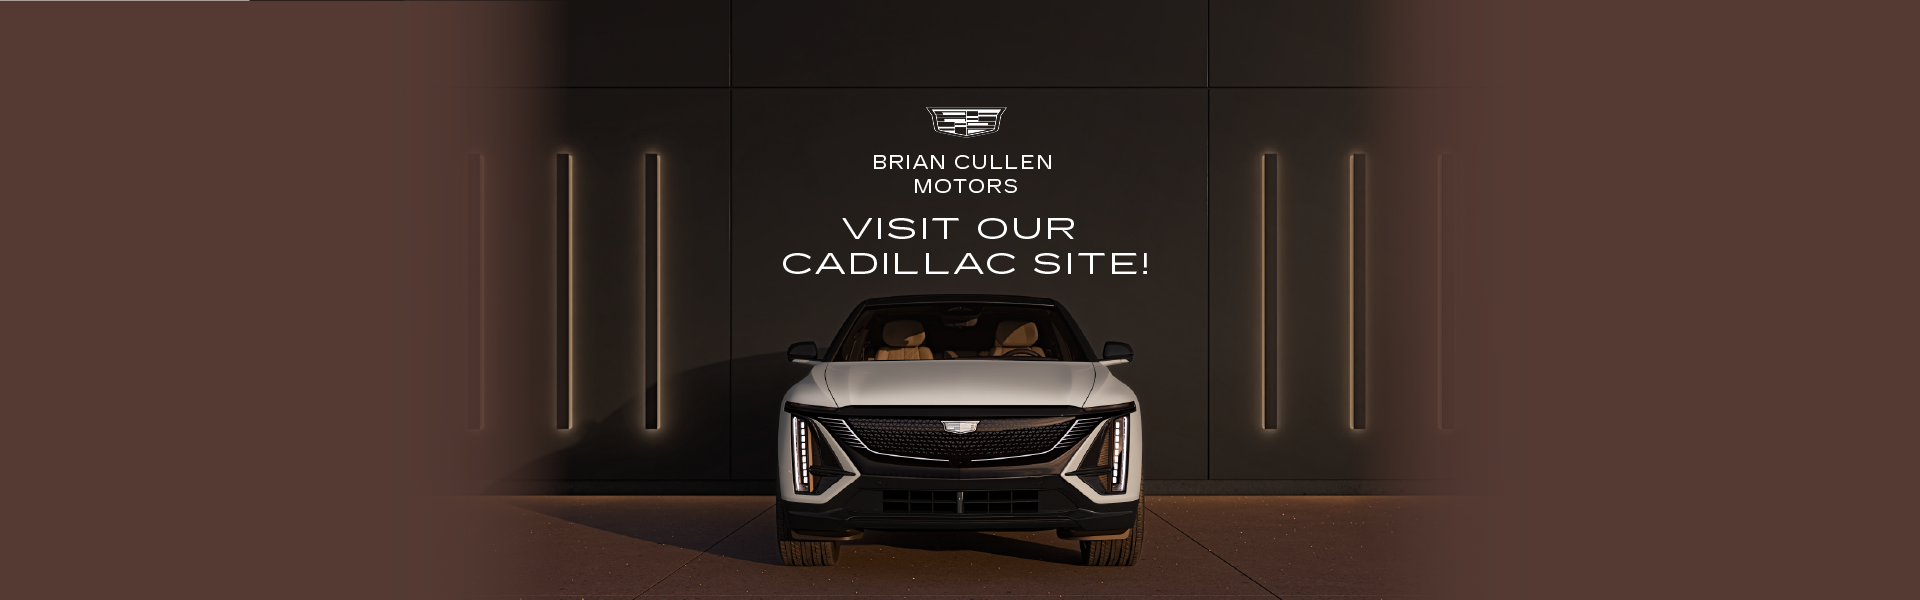 Visit our Cadillac Site